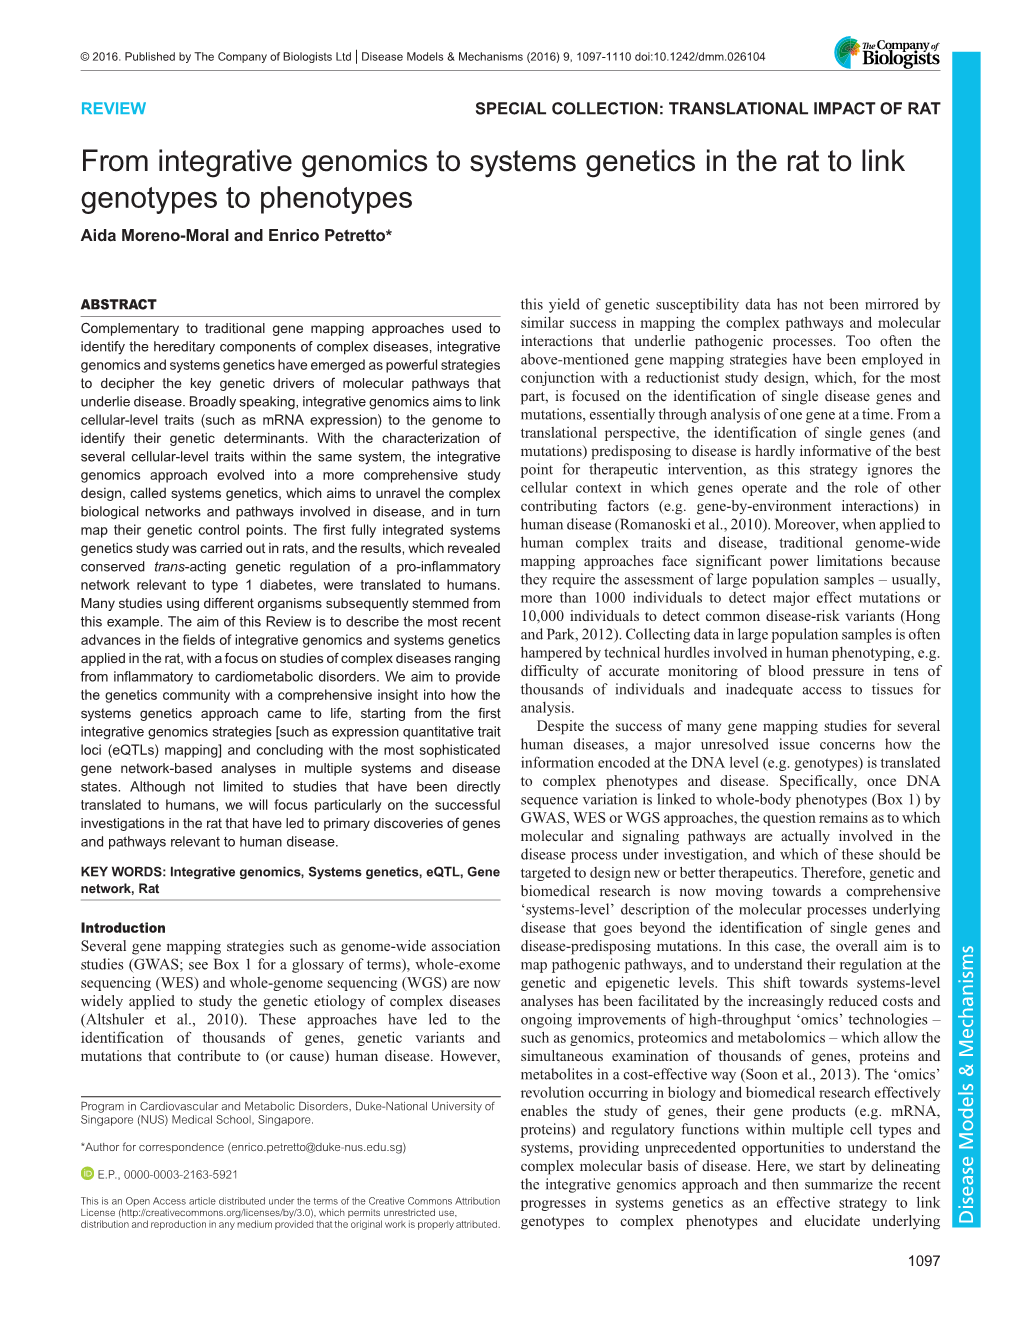 From Integrative Genomics to Systems Genetics in the Rat to Link Genotypes to Phenotypes Aida Moreno-Moral and Enrico Petretto*